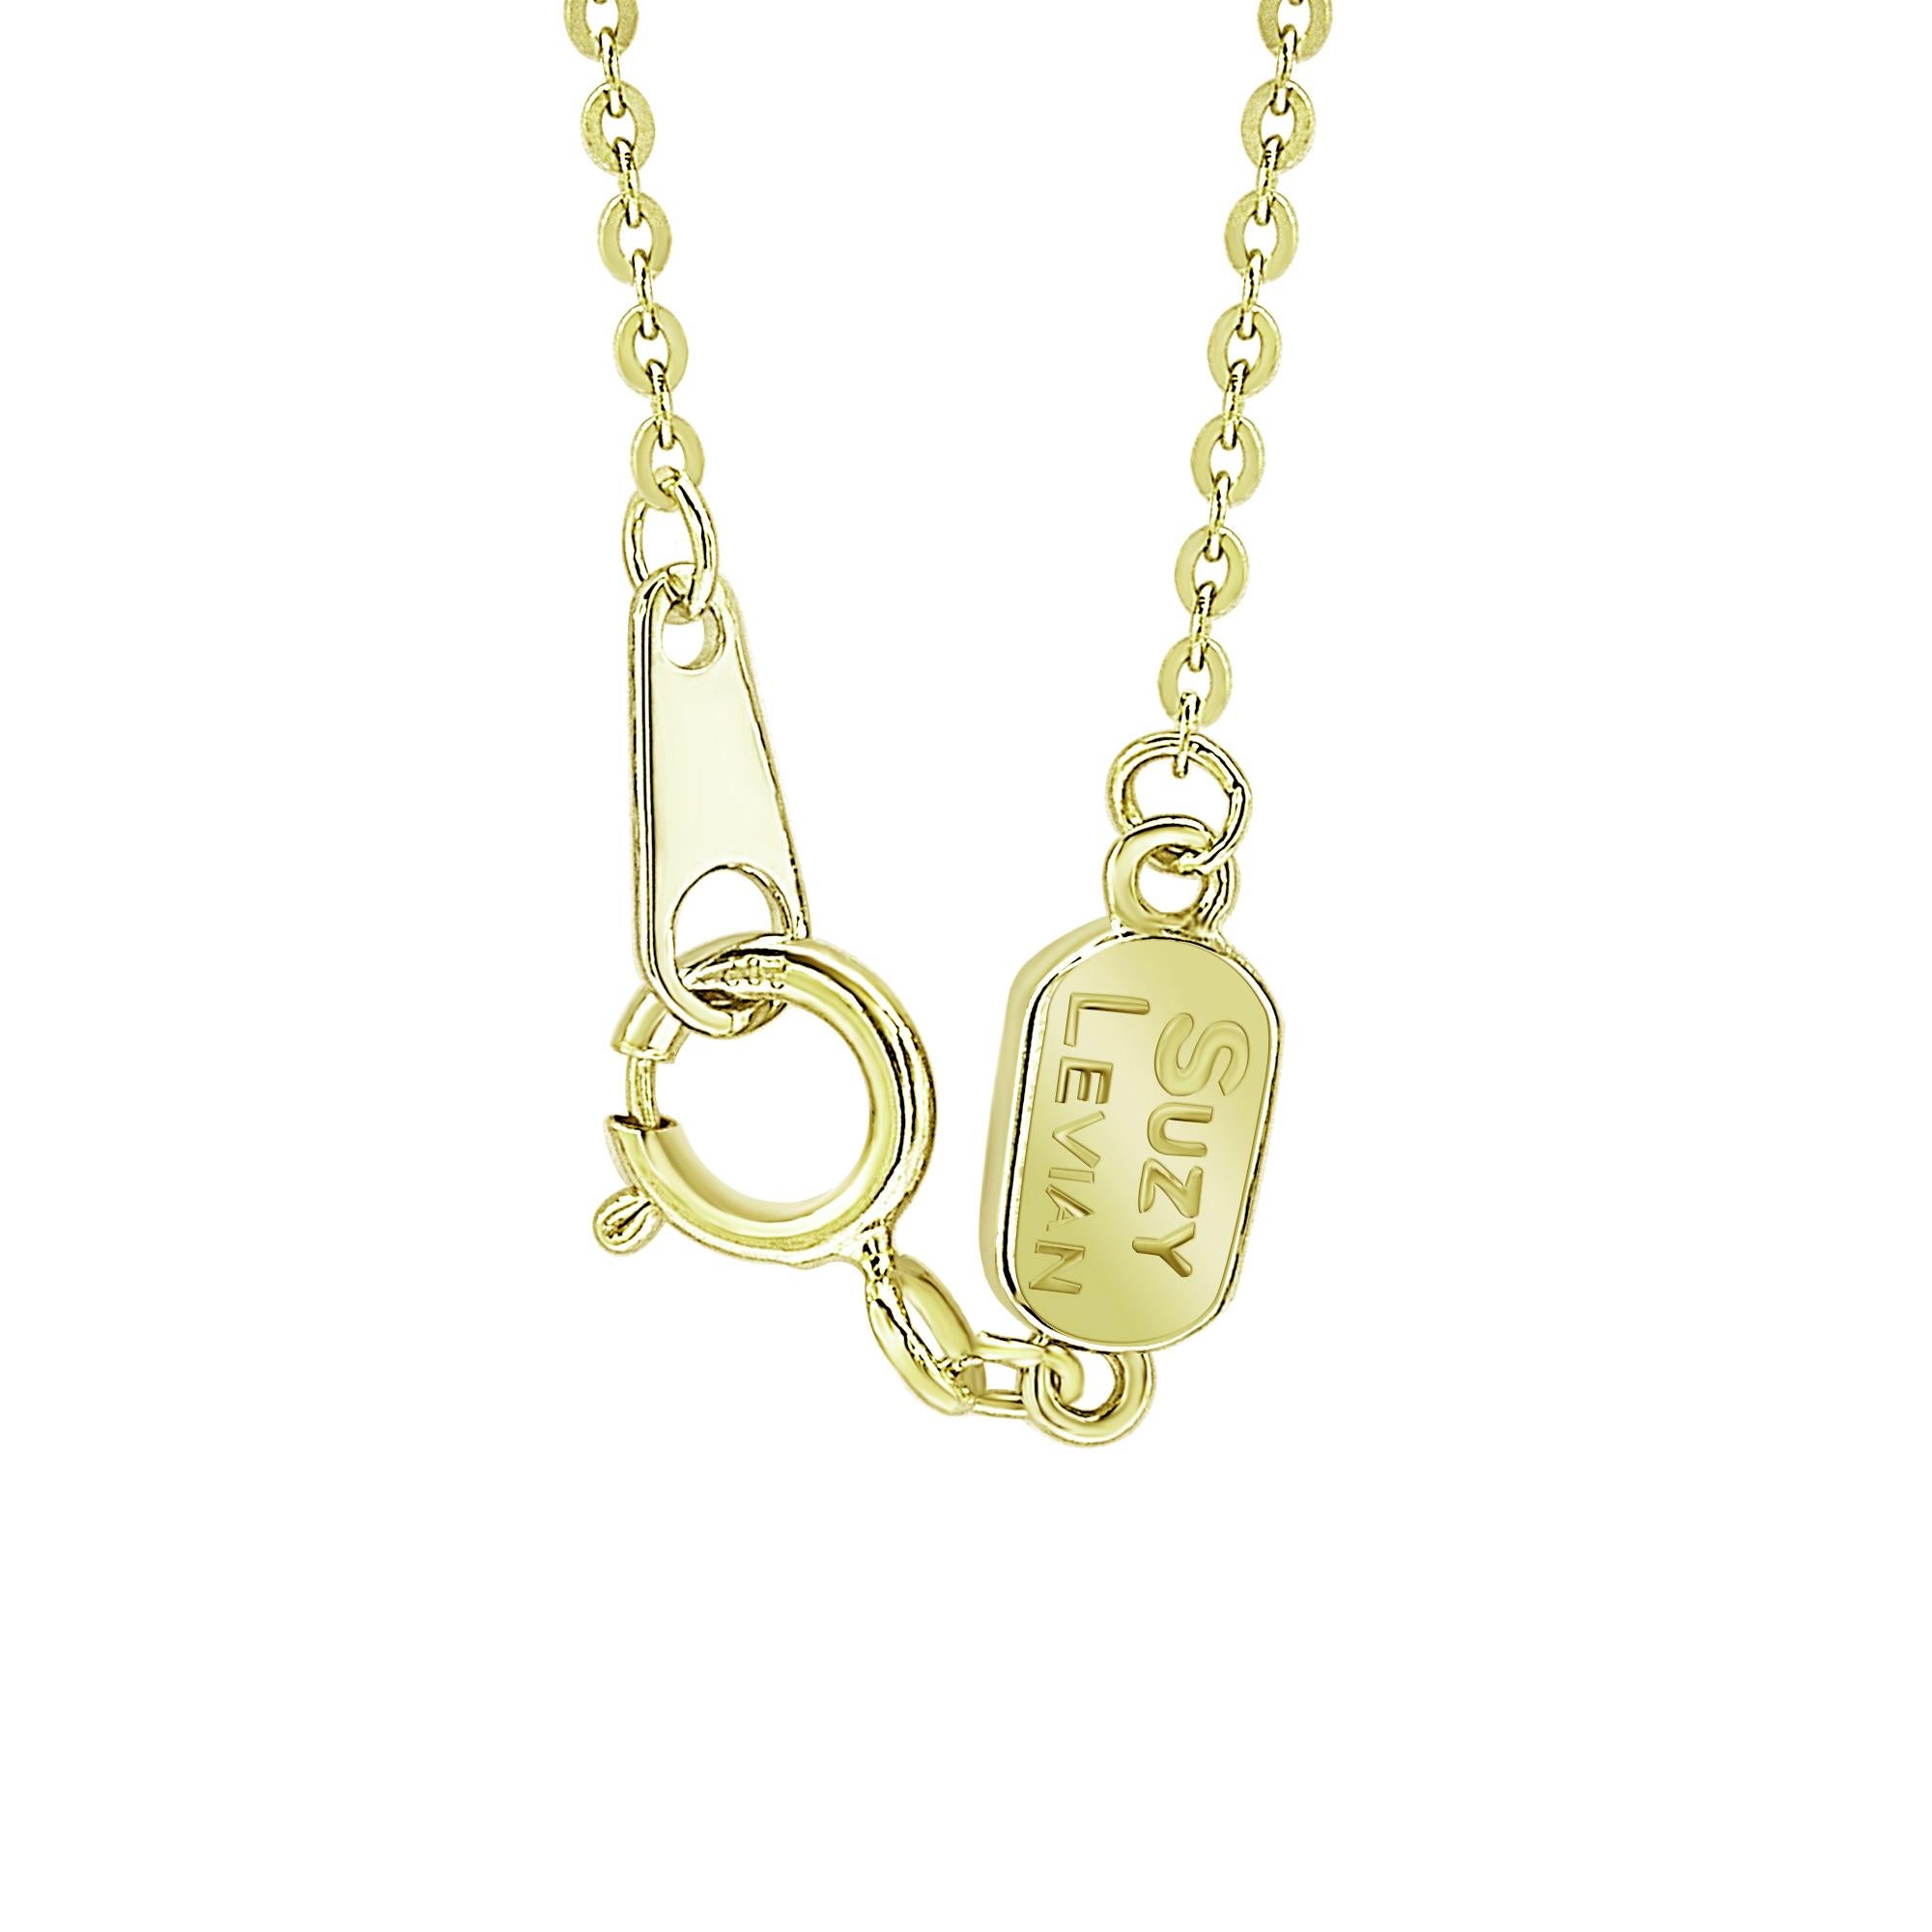 Contemporary Suzy Levian 0.10 Carat White Diamond 14K Yellow Gold Letter Initial Necklace, U For Sale